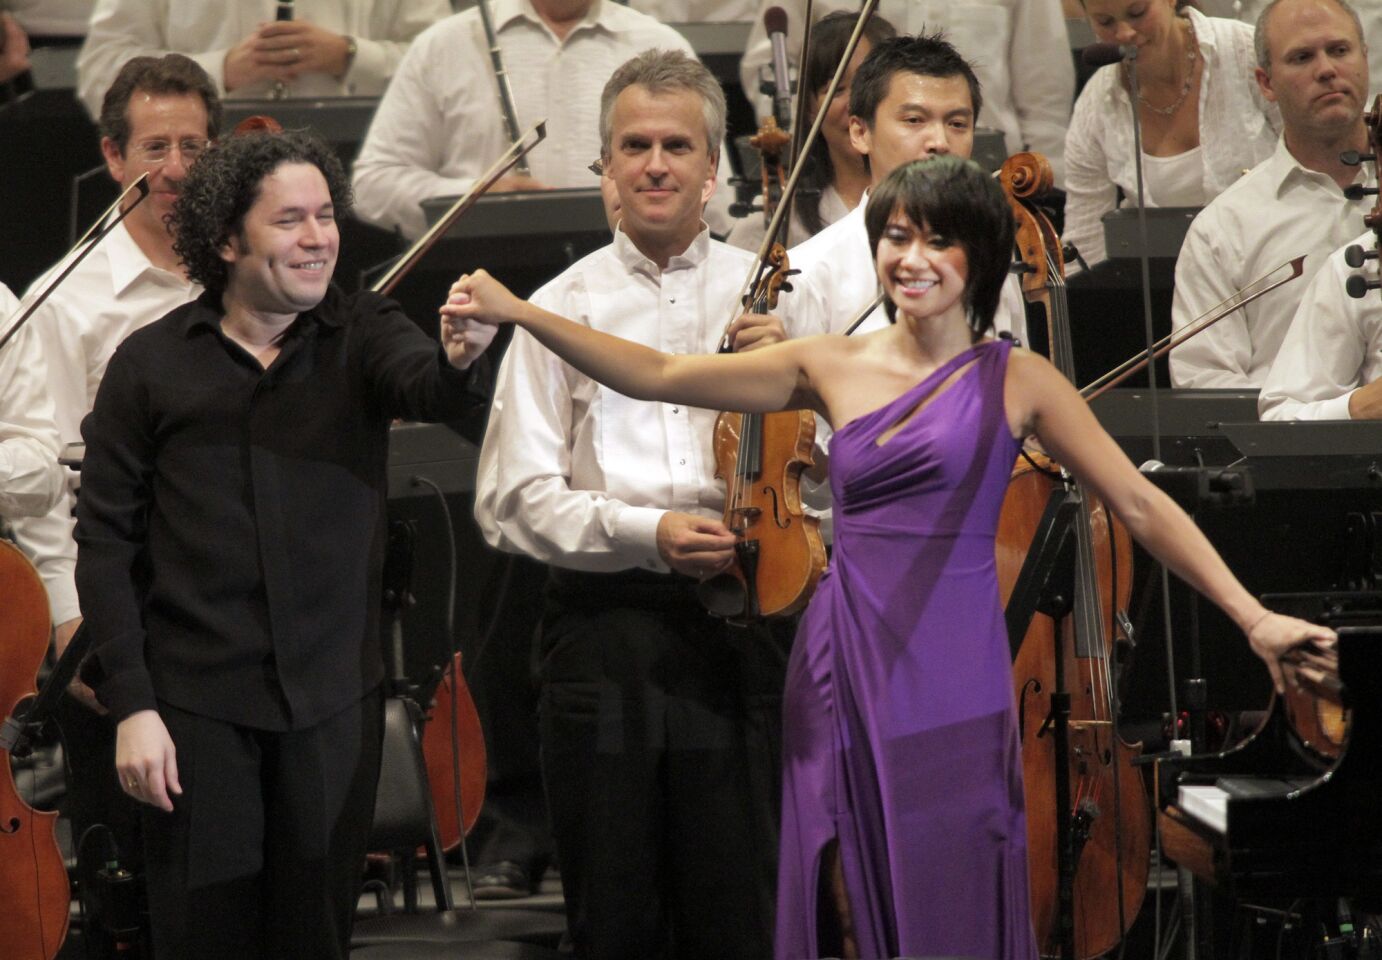 Conductor Gustavo Dudamel, left, concertmaster Martin Chaulifer, center, and piano soloist Yuja Wang, right, at the L.A. Phil's performance at the Hollywood Bowl on Aug. 9, 2012. More: Yuja Wang turns heads at the Hollywood Bowl with a purple gown Photos